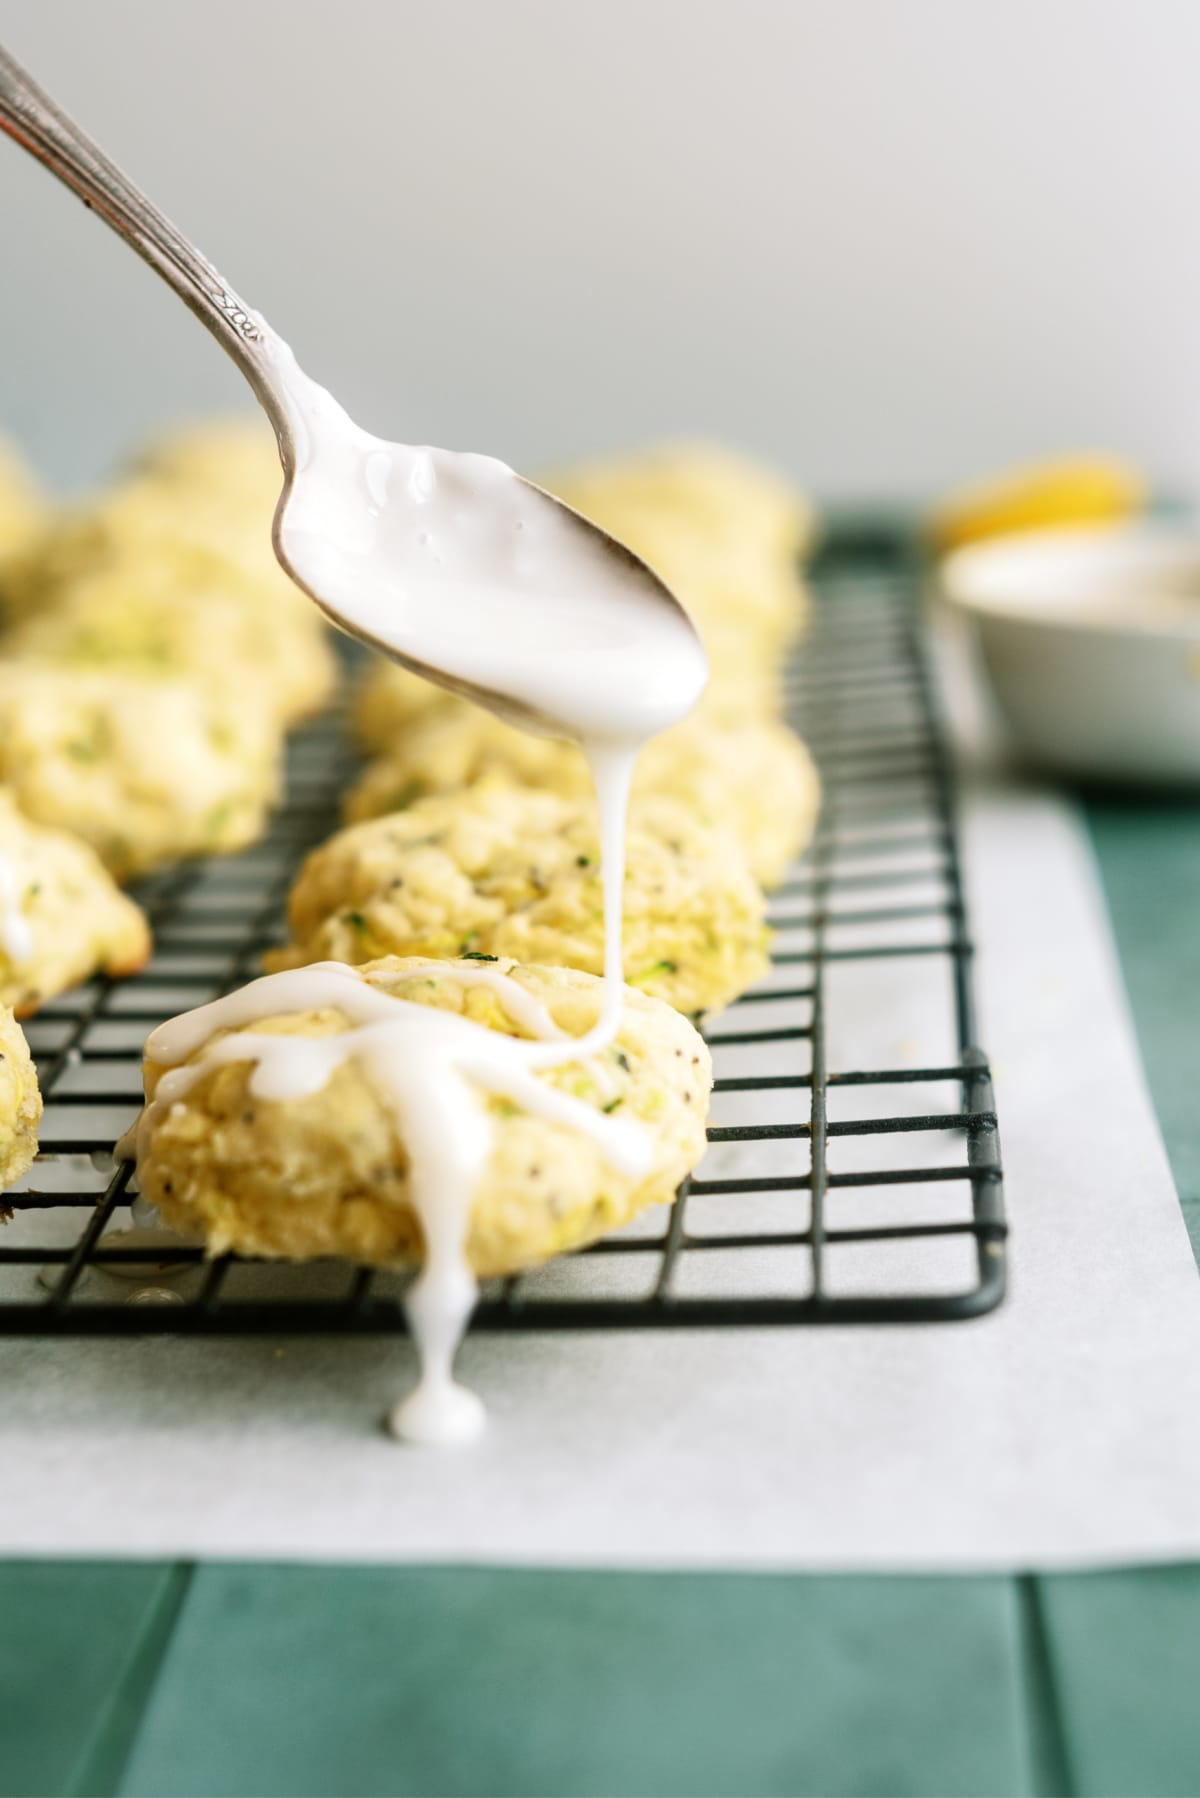 lemon-zucchini-cookies on cooling rack being glazed with spoon